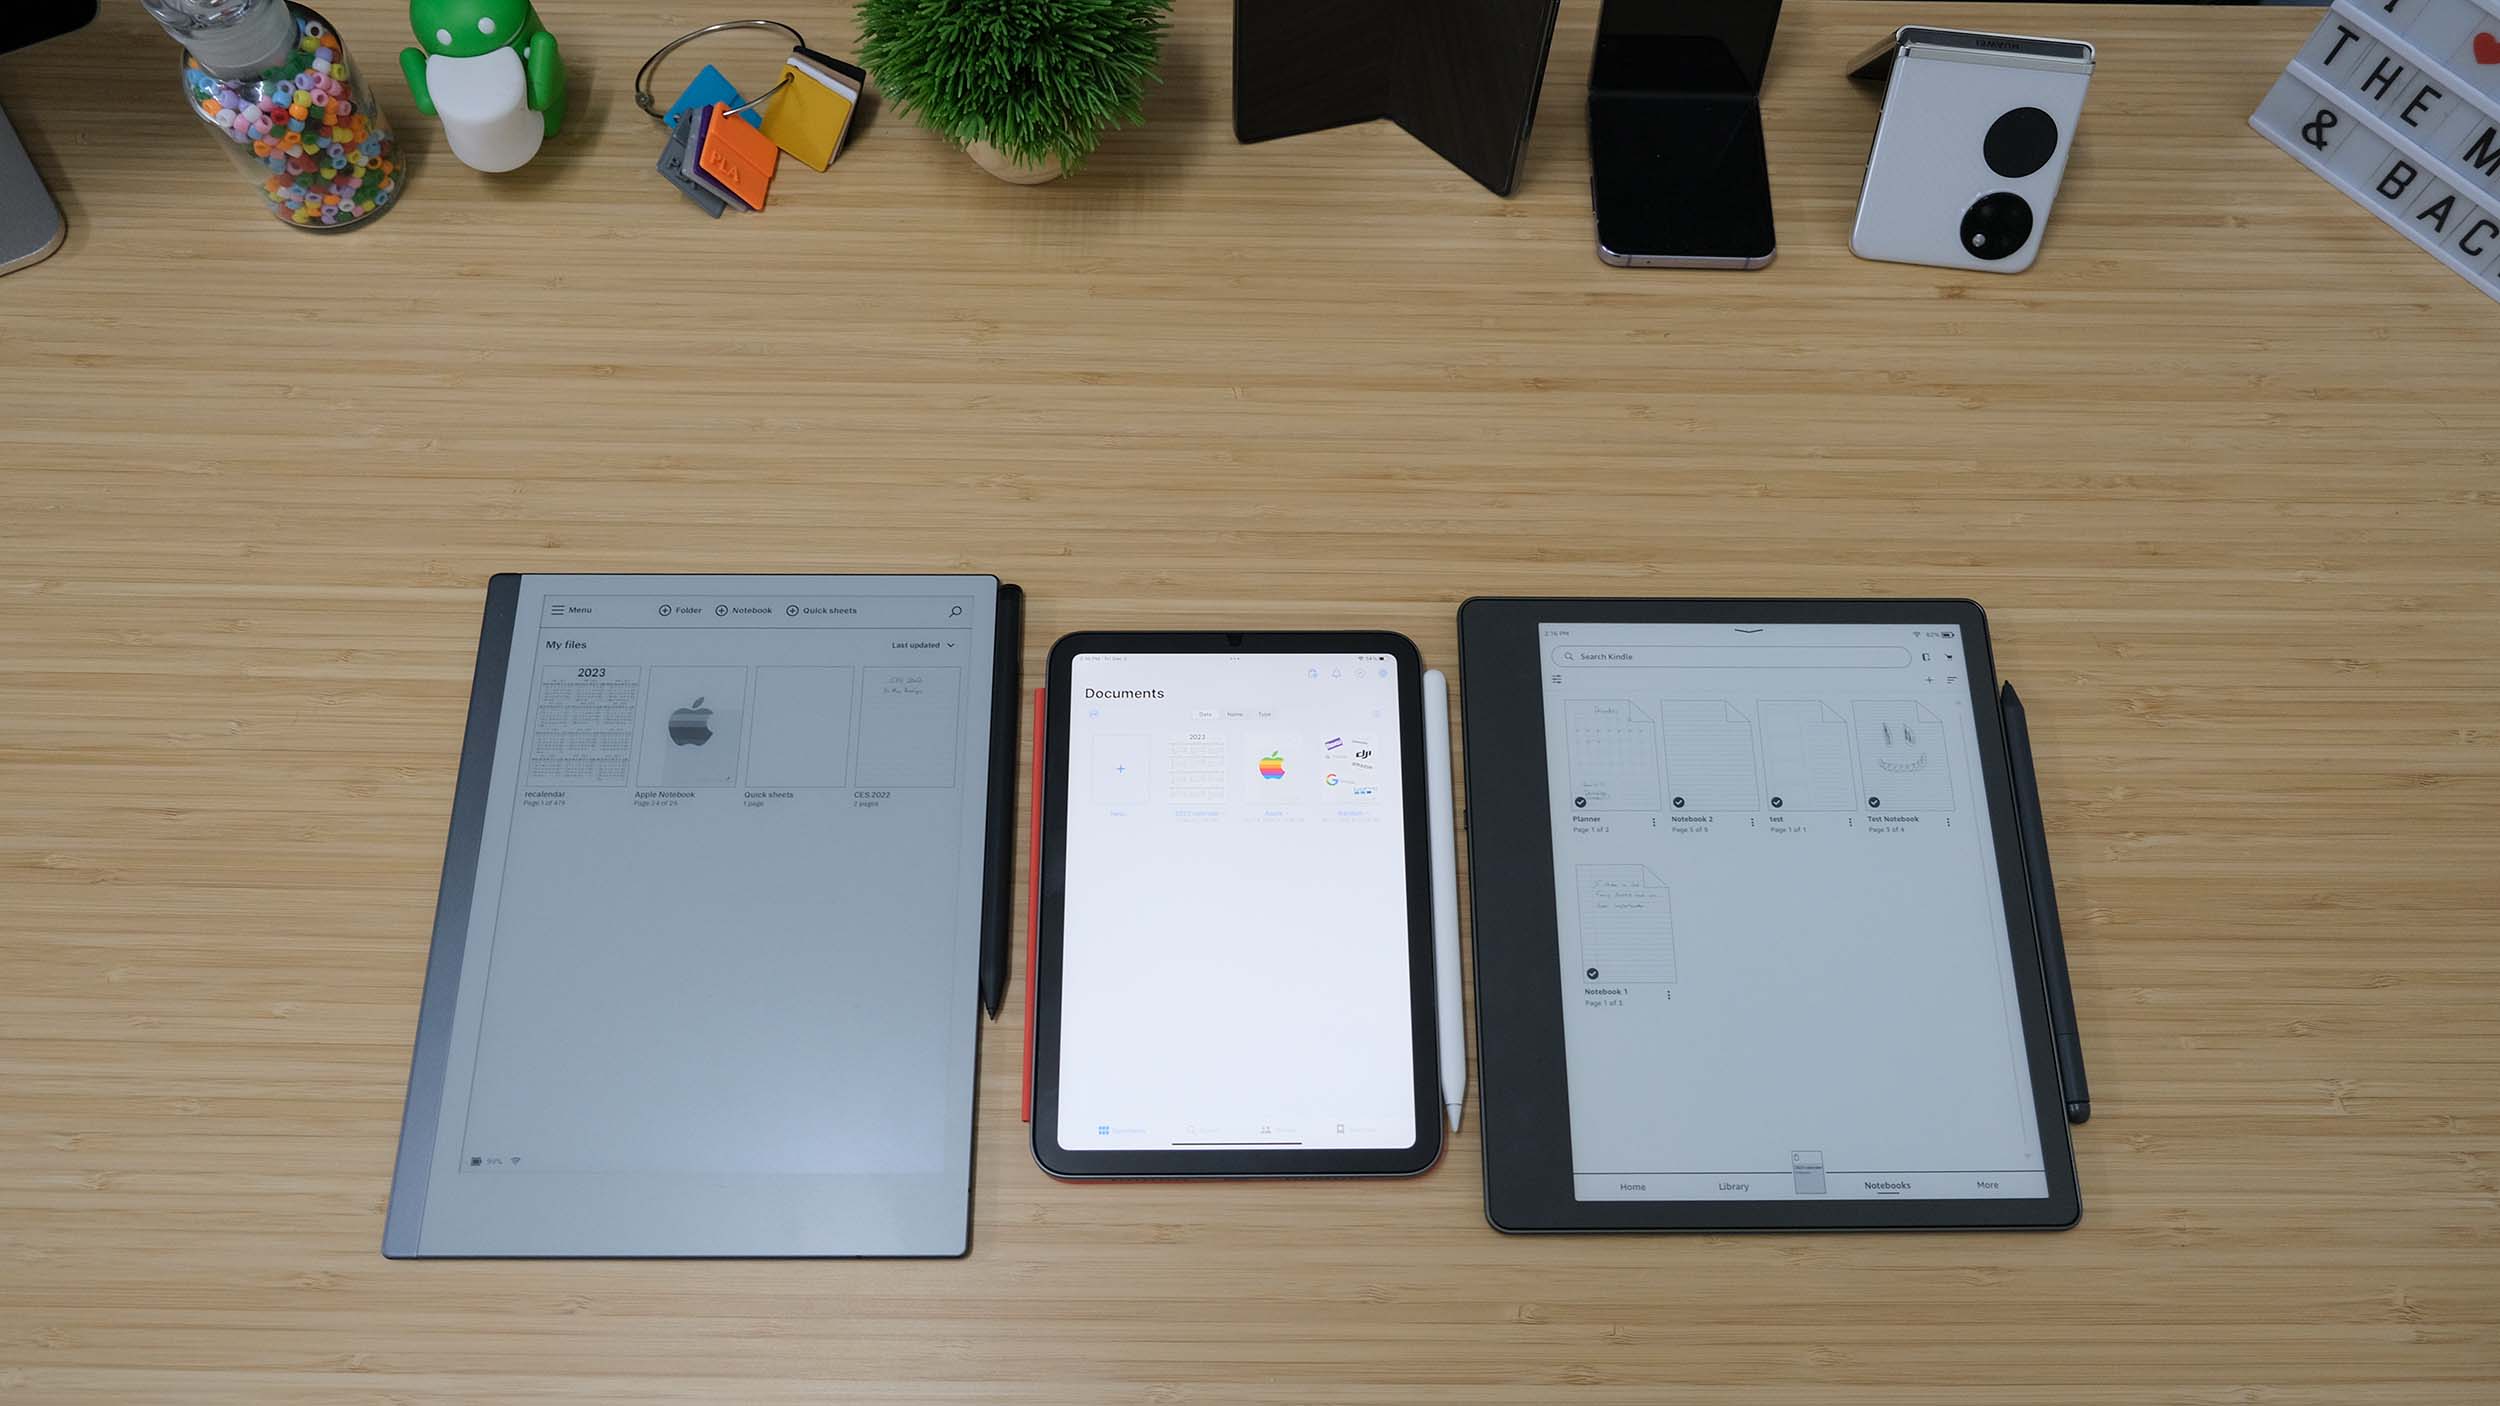 Kindle Scribe vs Remarkable 2: How do they compare?